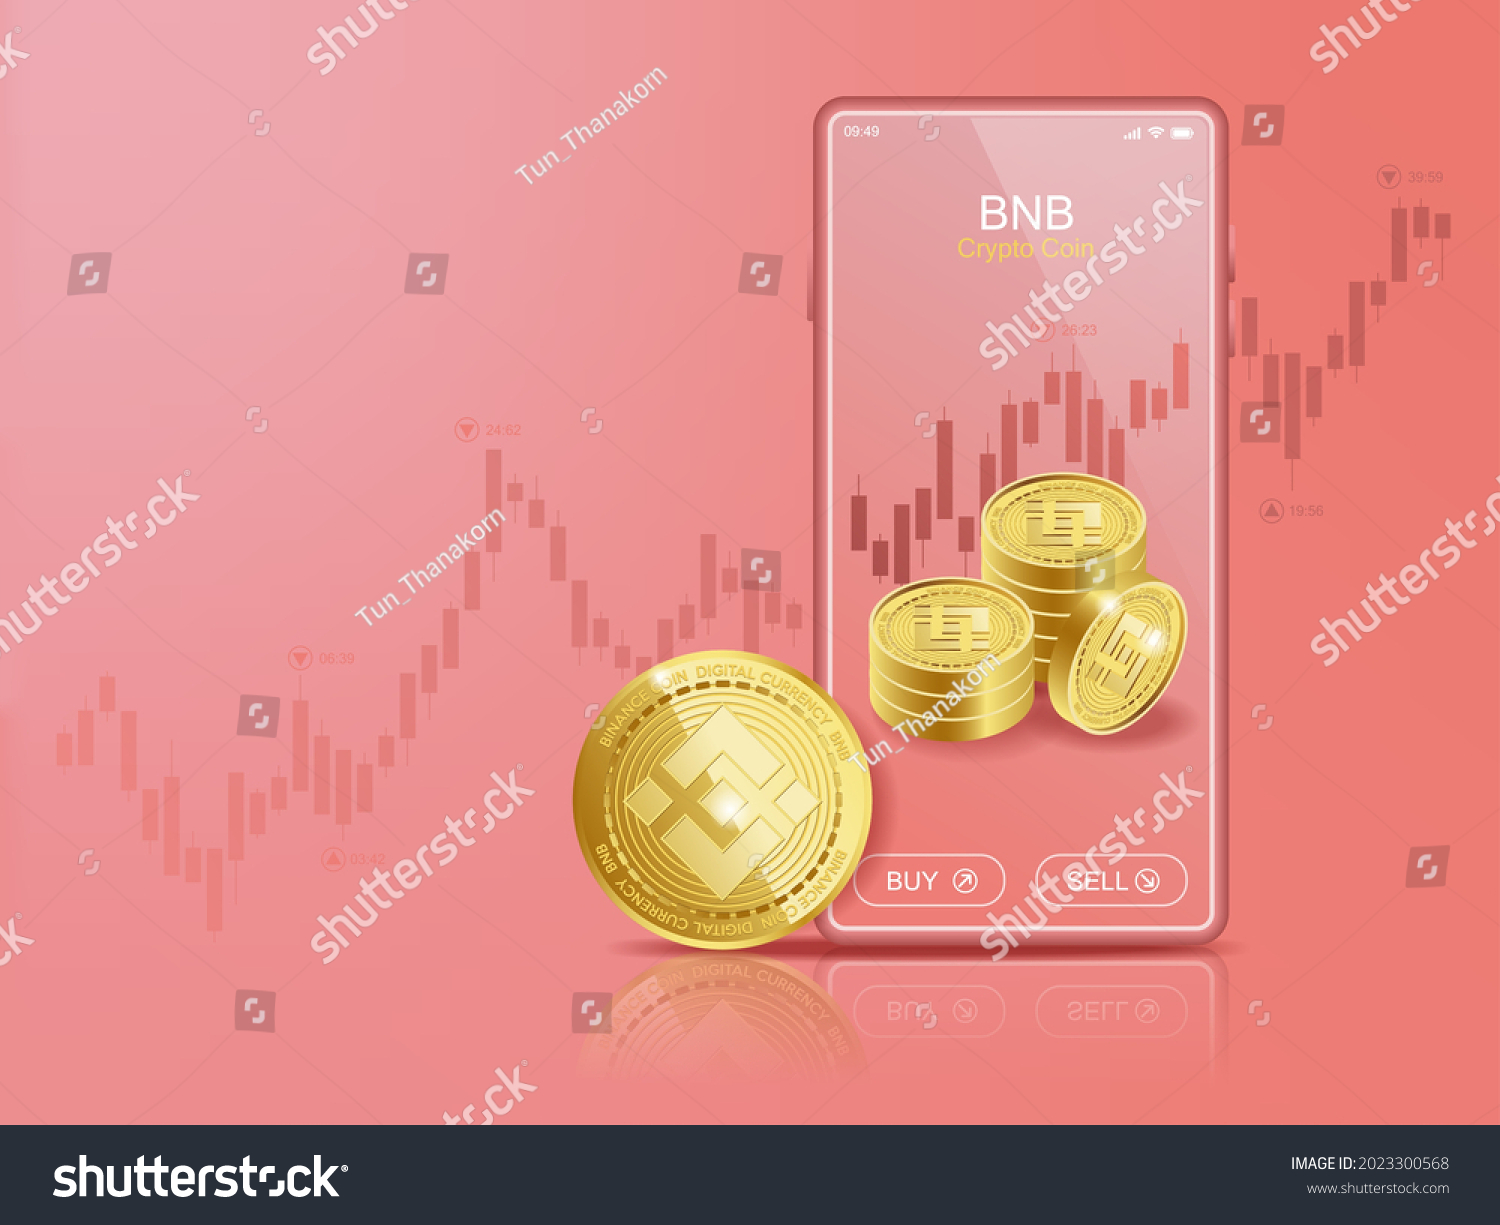 SVG of Trade Binance (BNB) on mobile through the system Cryptocurrency. Perspective Illustration about Crypto Coins. svg